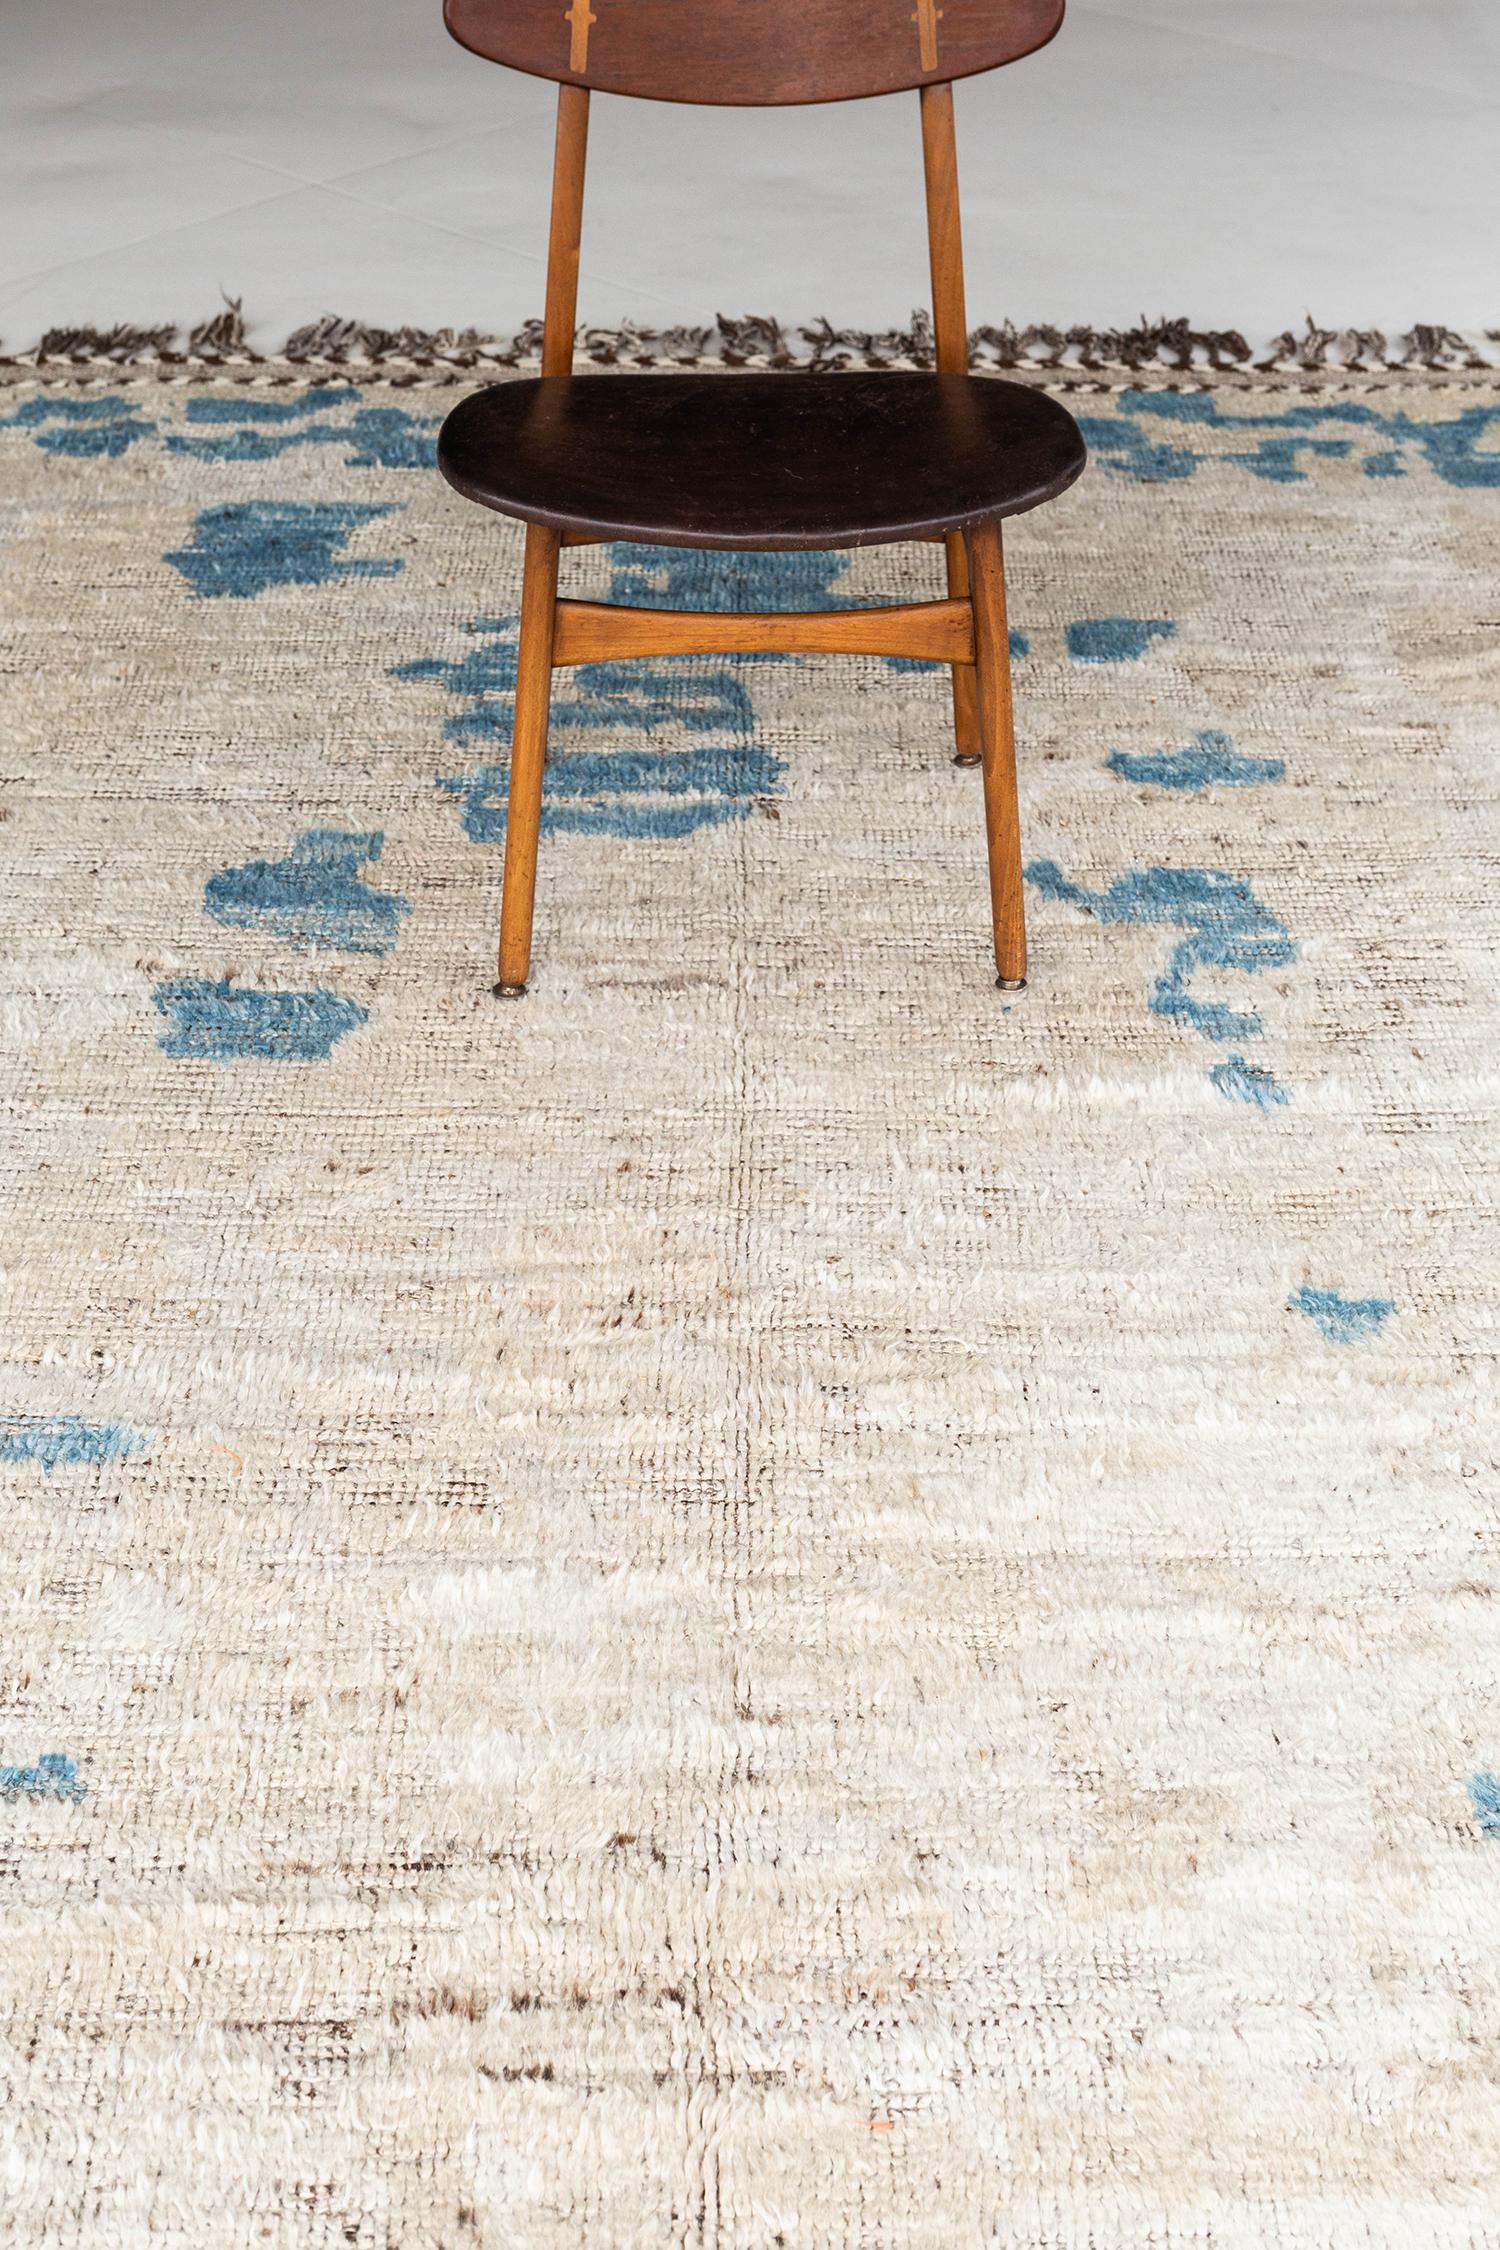 Zazate' is made of luxurious wool and is made of timeless design elements. Its weaving of natural earth tones with vibrant blues and unique design elements is what makes the Atlas Collection so unique and sought after. Mehraban's Atlas collection is